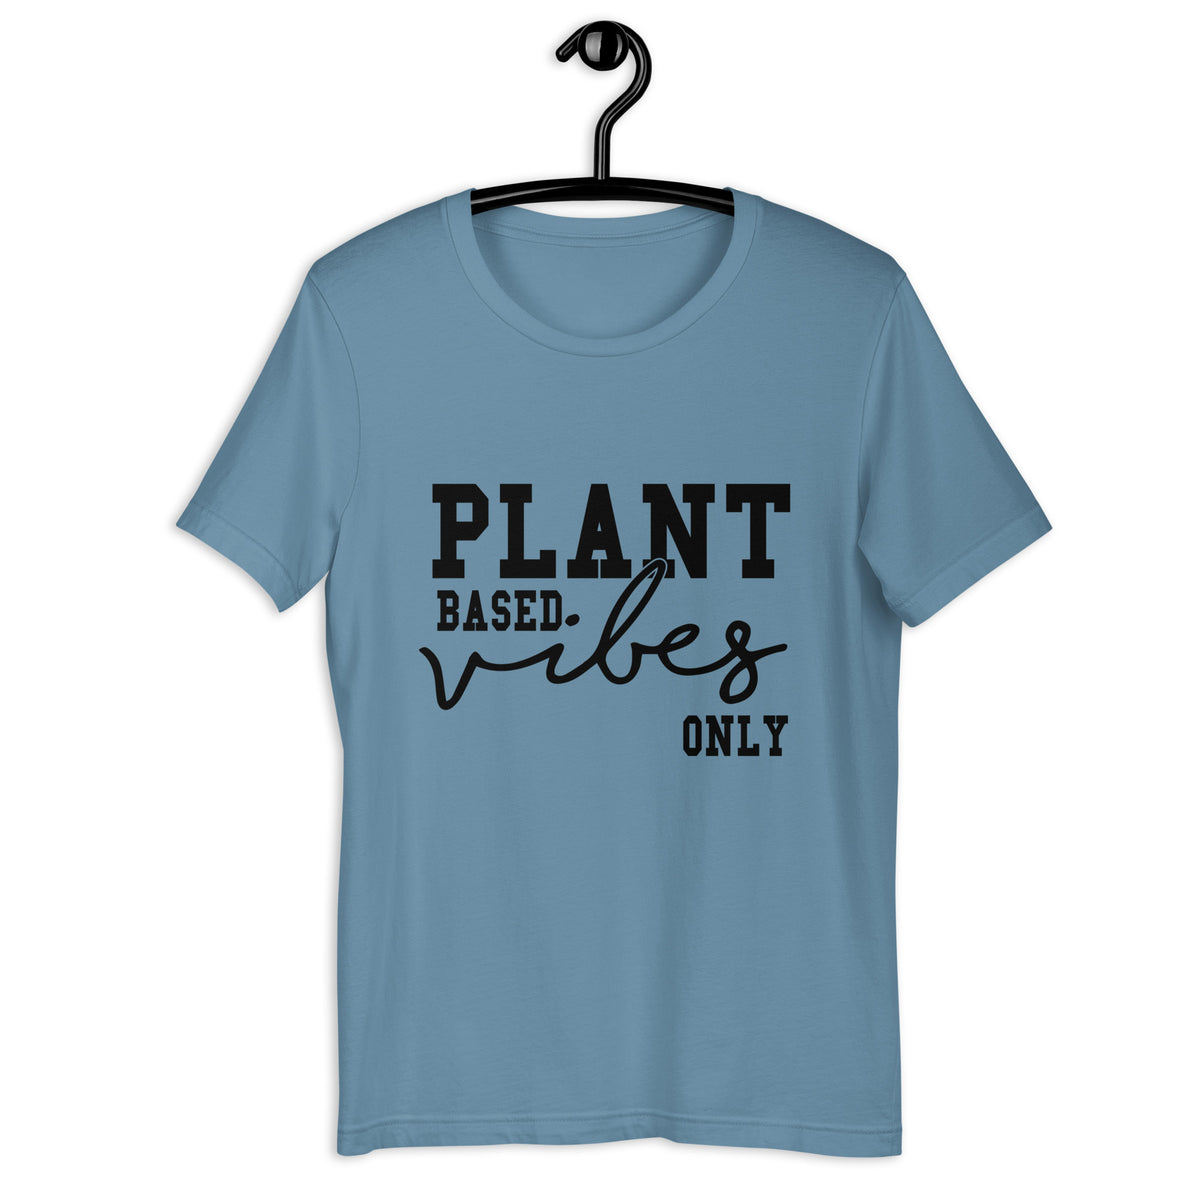 PLANT BASED VIBES Colored t-shirt